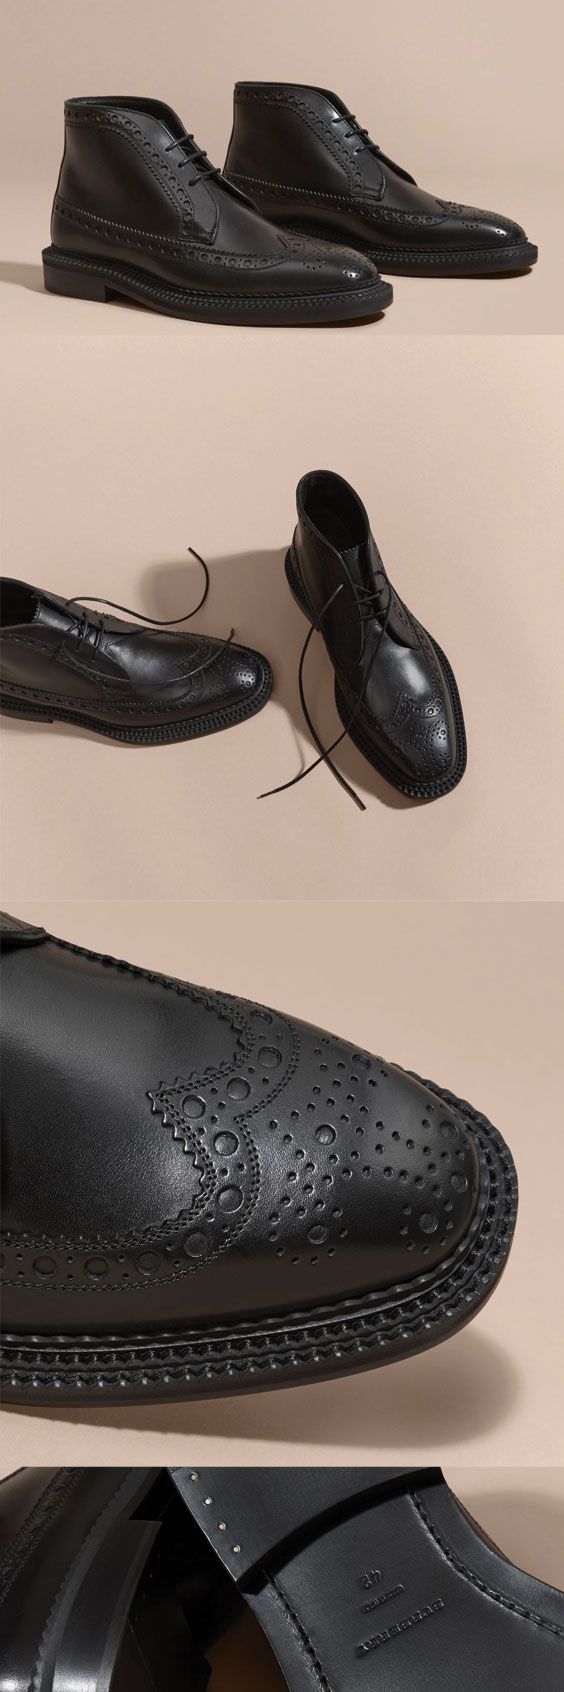 Burberry Leather Brogue Boots $825 #ads Men shoes boots